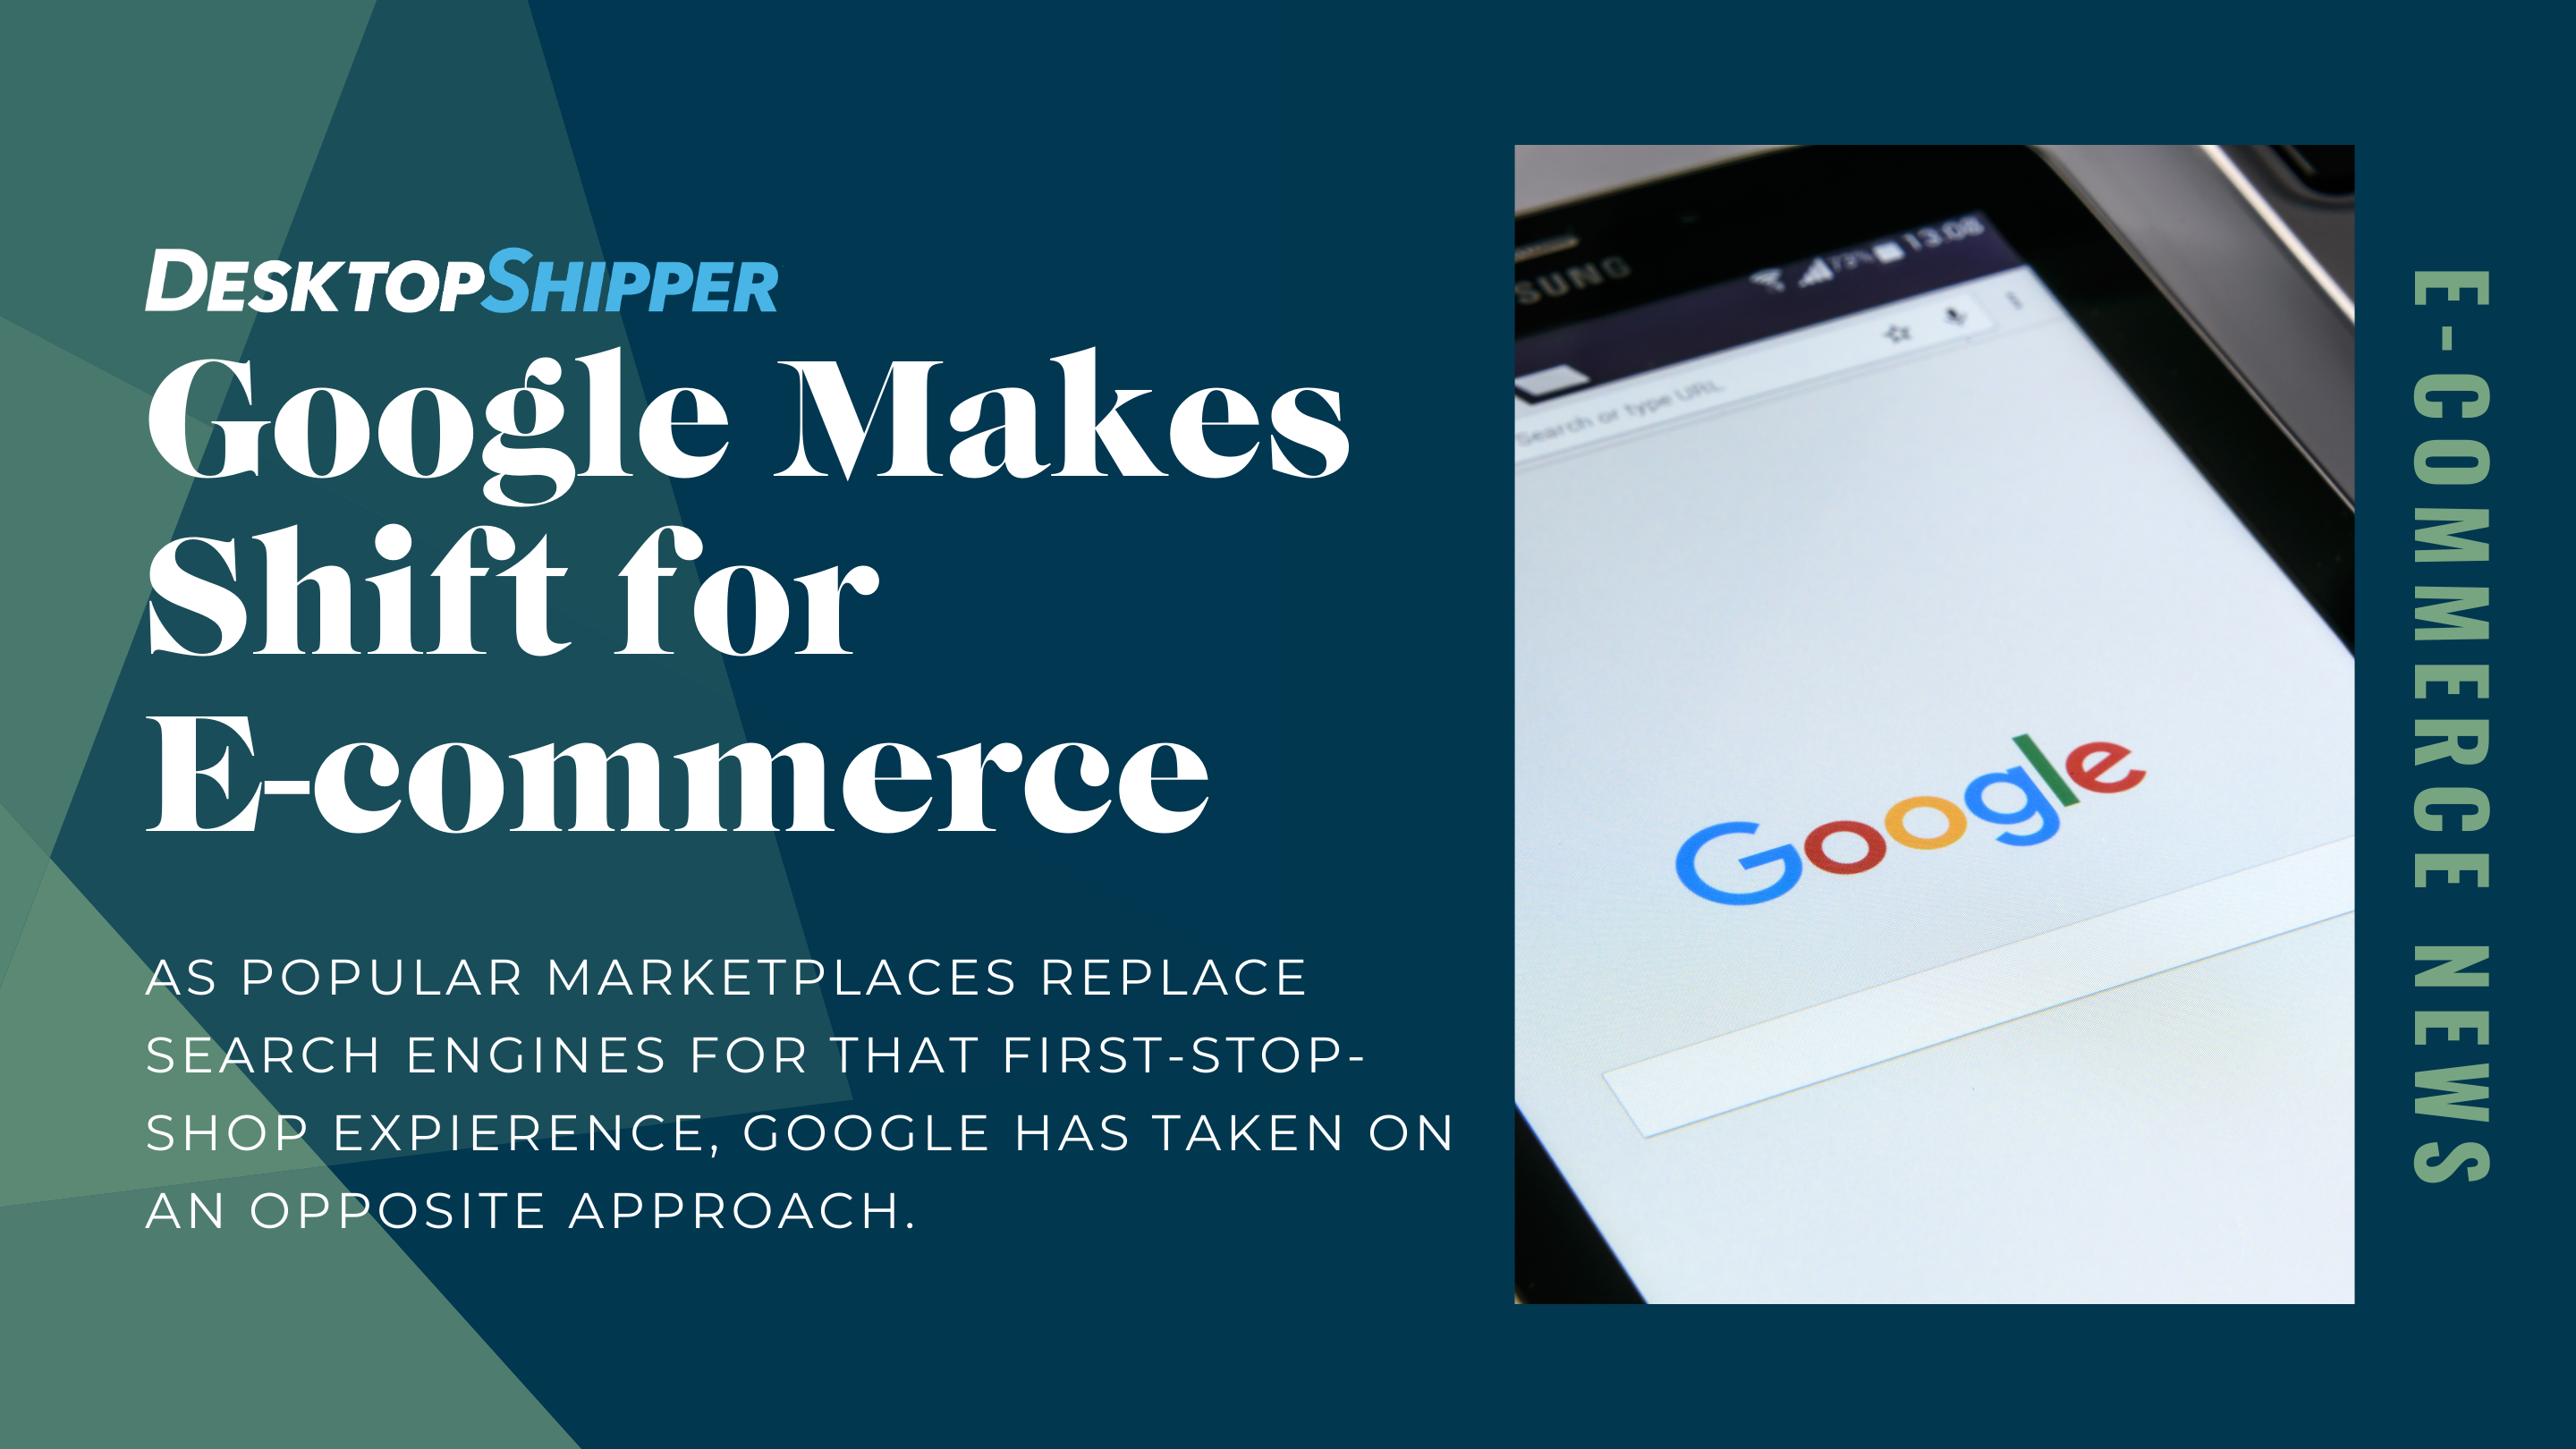 Google Shifts Focus to E-commerce